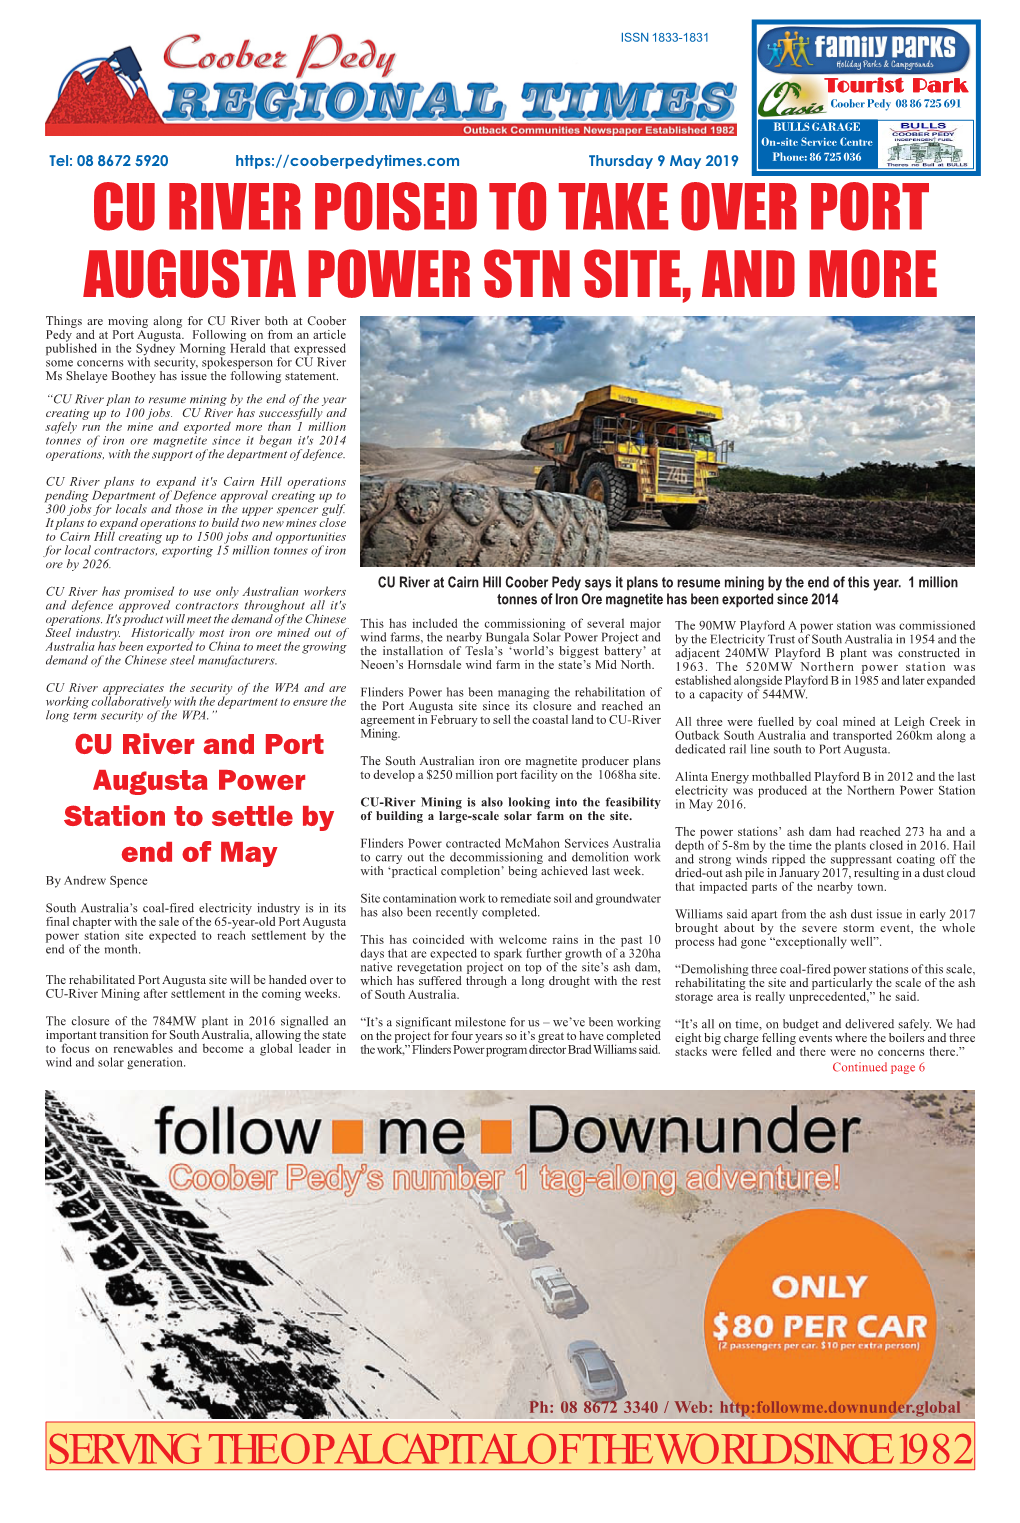 CU RIVER POISED to TAKE OVER PORT AUGUSTA POWER STN SITE, and MORE Things Are Moving Along for CU River Both at Coober Pedy and at Port Augusta